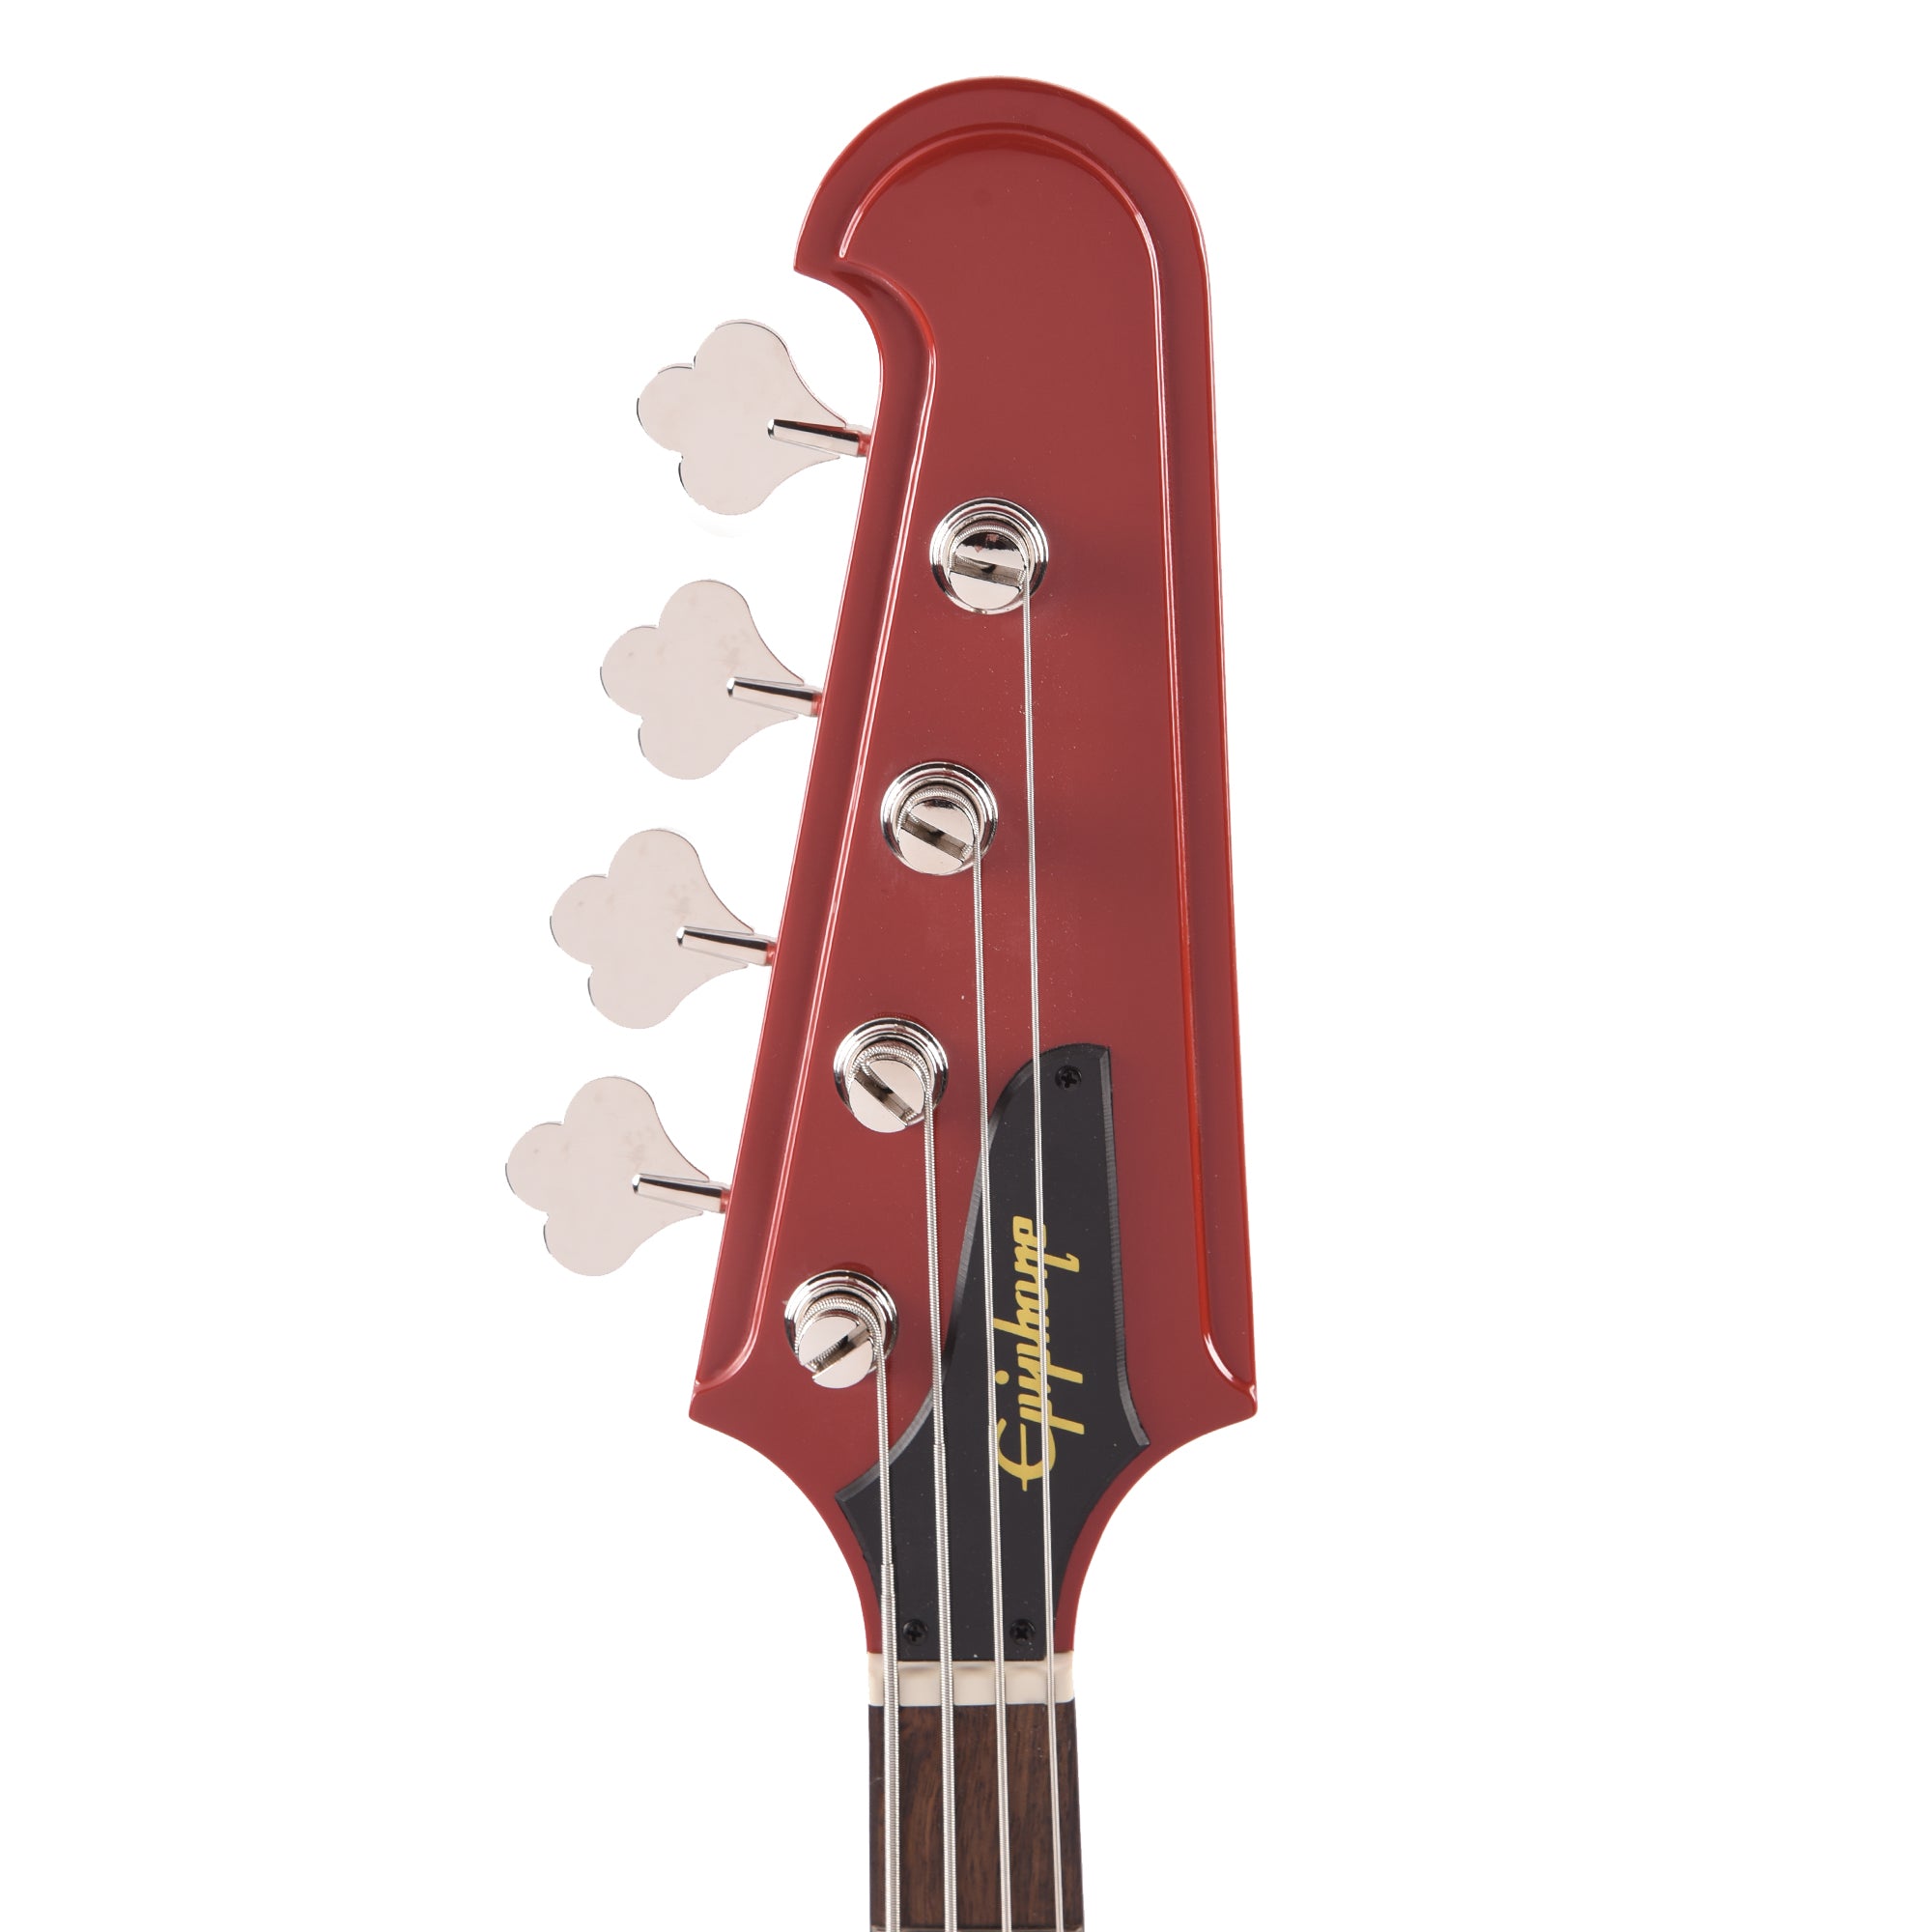 Epiphone Inspired by Gibson Thunderbird '64 Ember Red